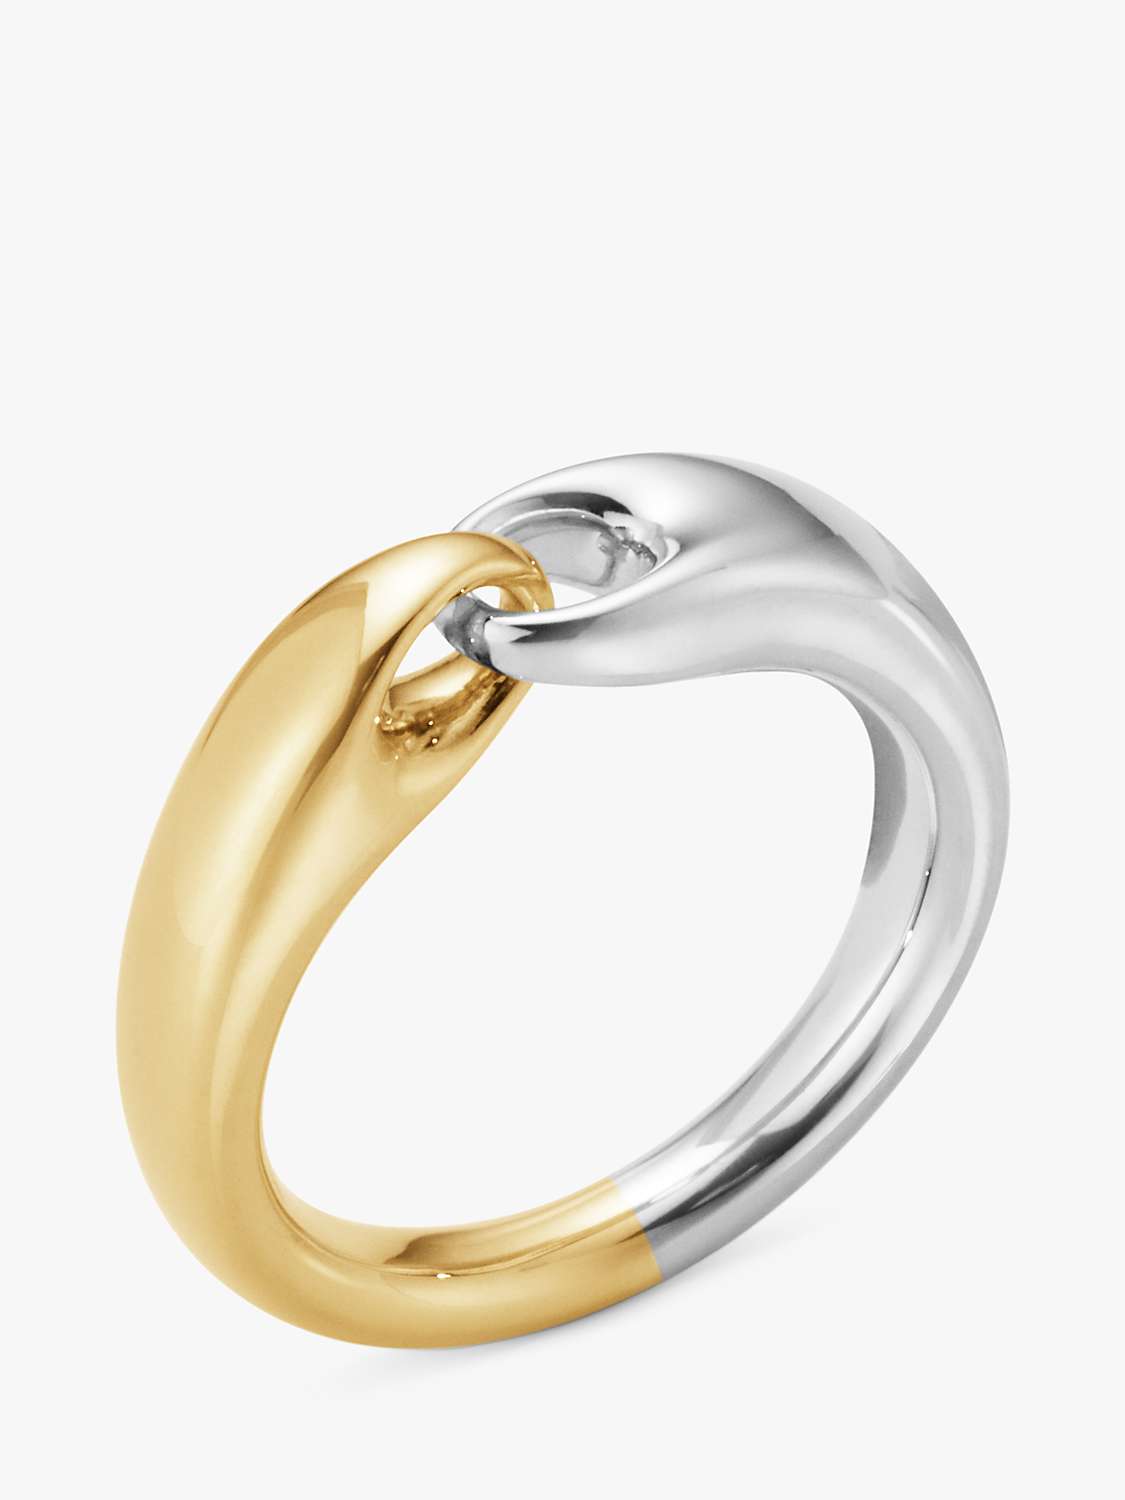 Buy Georg Jensen Organic Links 18ct Yellow Gold & Silver Band Ring, Gold/Silver Online at johnlewis.com